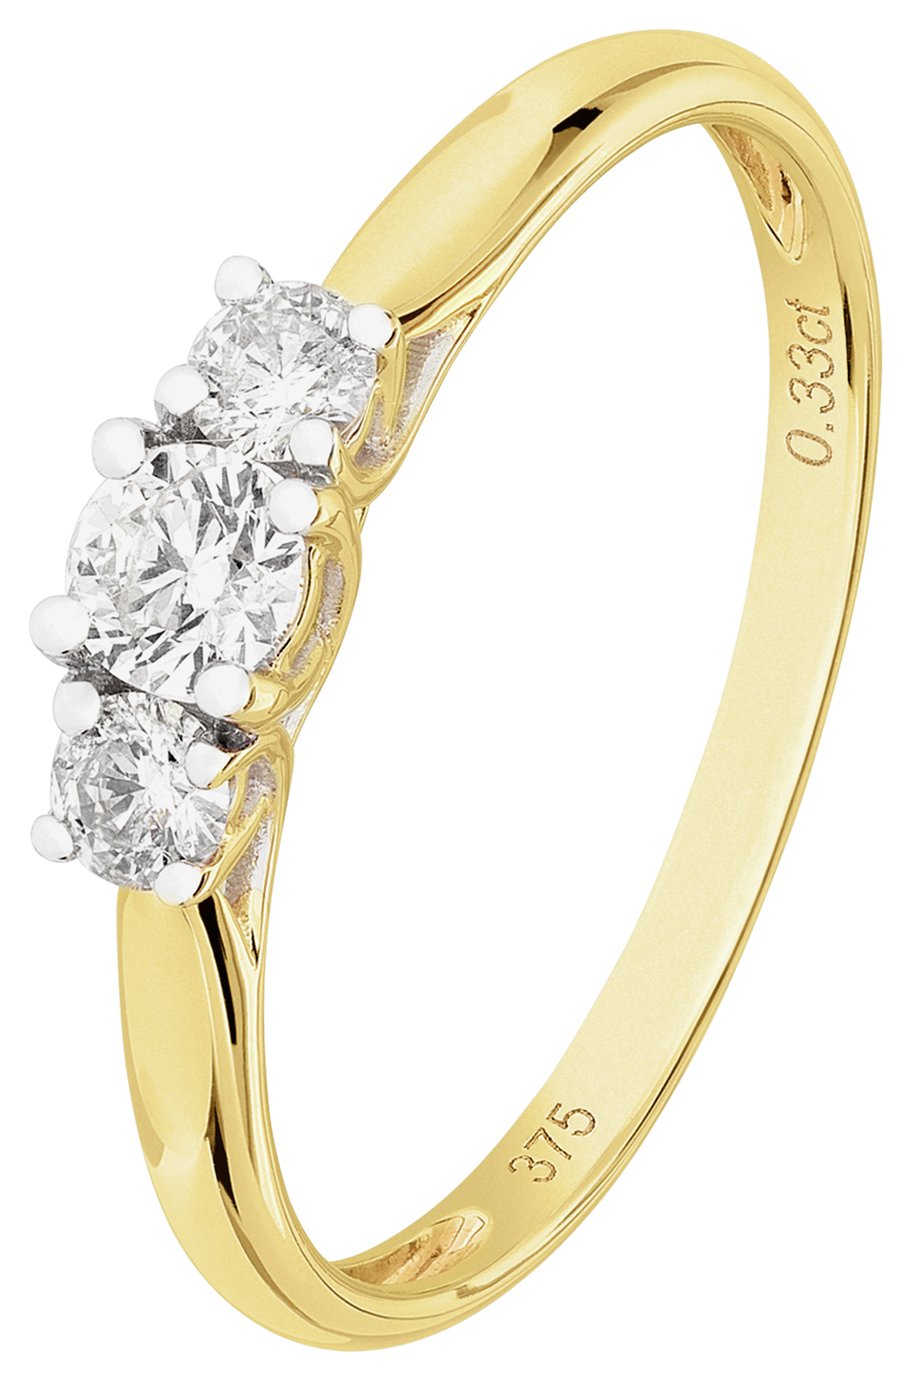 Revere 9ct Gold 0.33ct Diamond Trilogy Engagement Ring - H